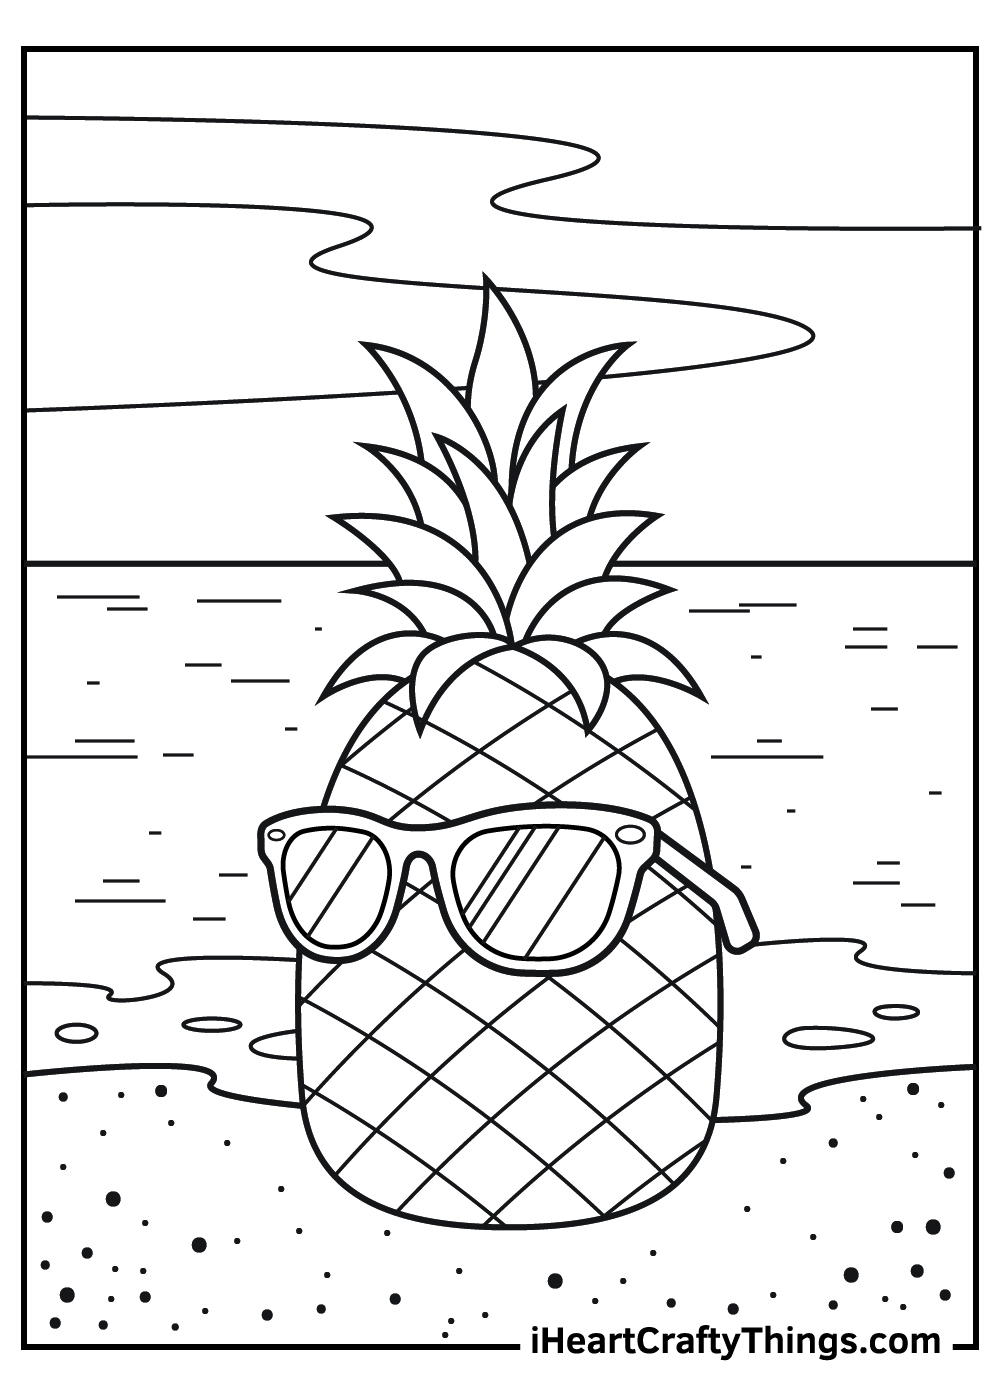 Pineapple coloring pages free printables